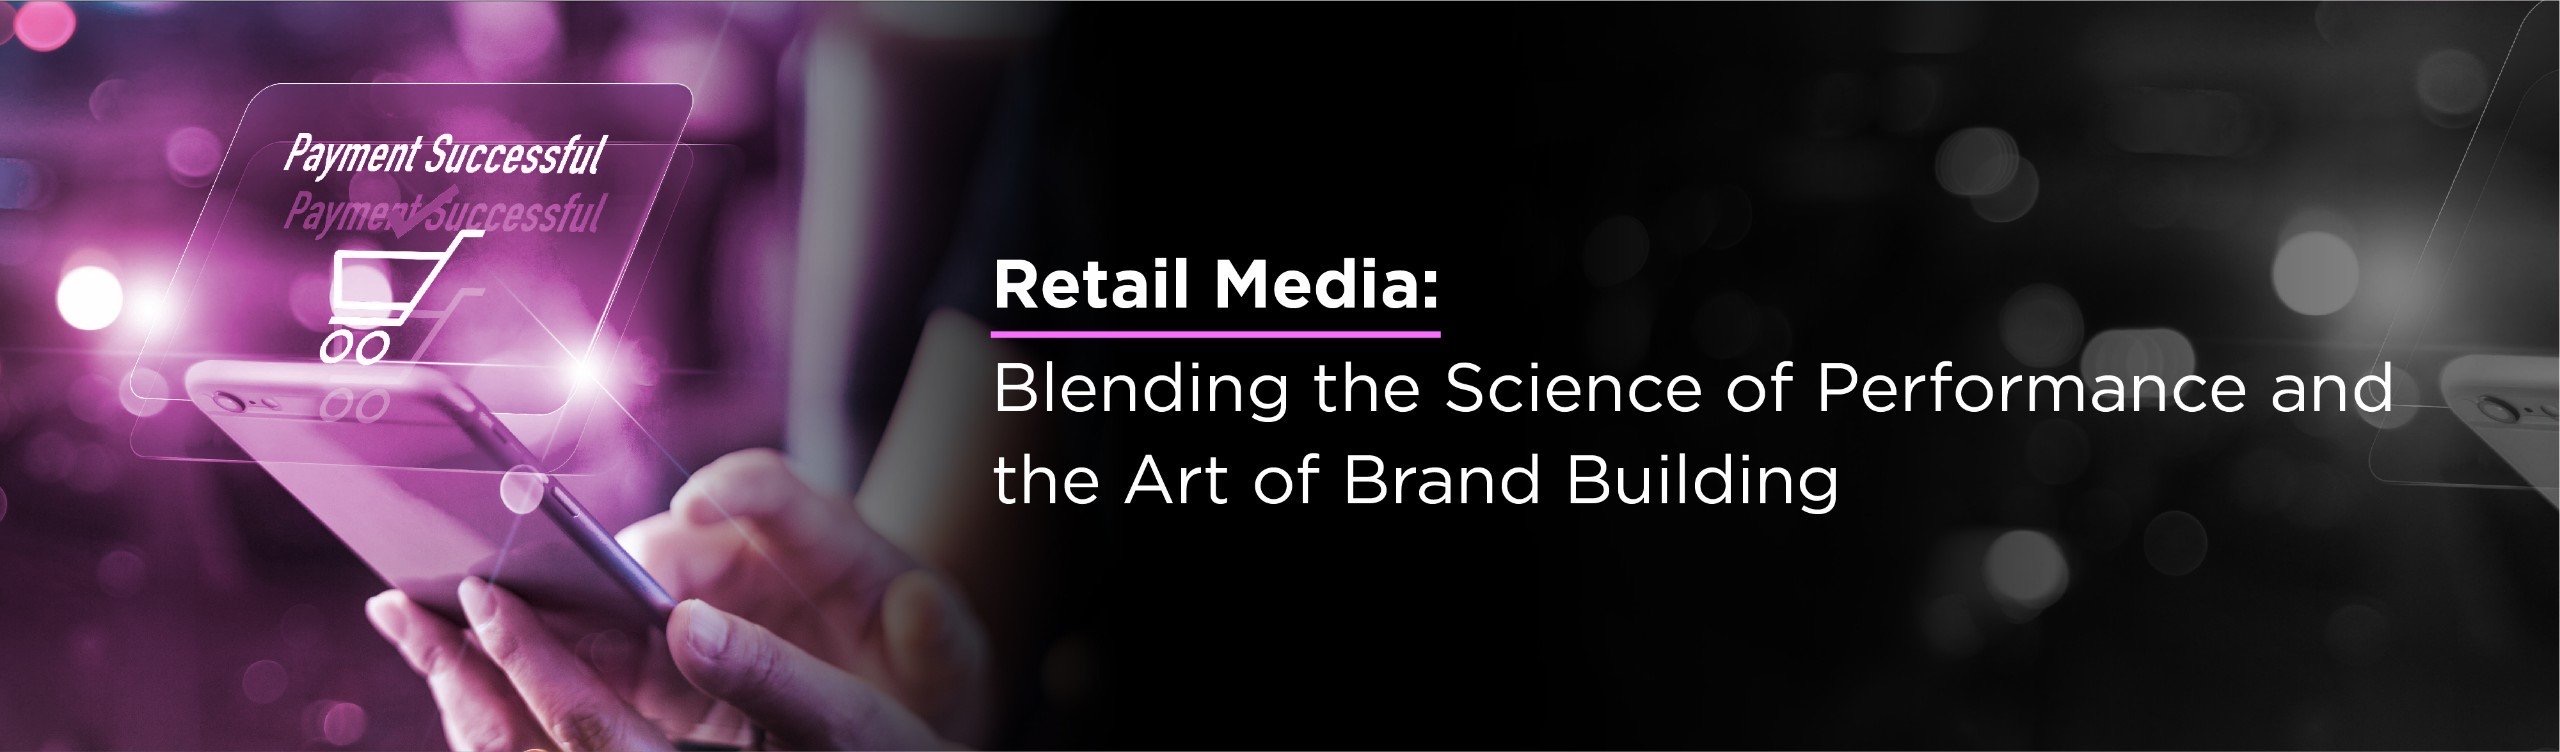 Retail Media: Blending the science of performance and the art of brand building